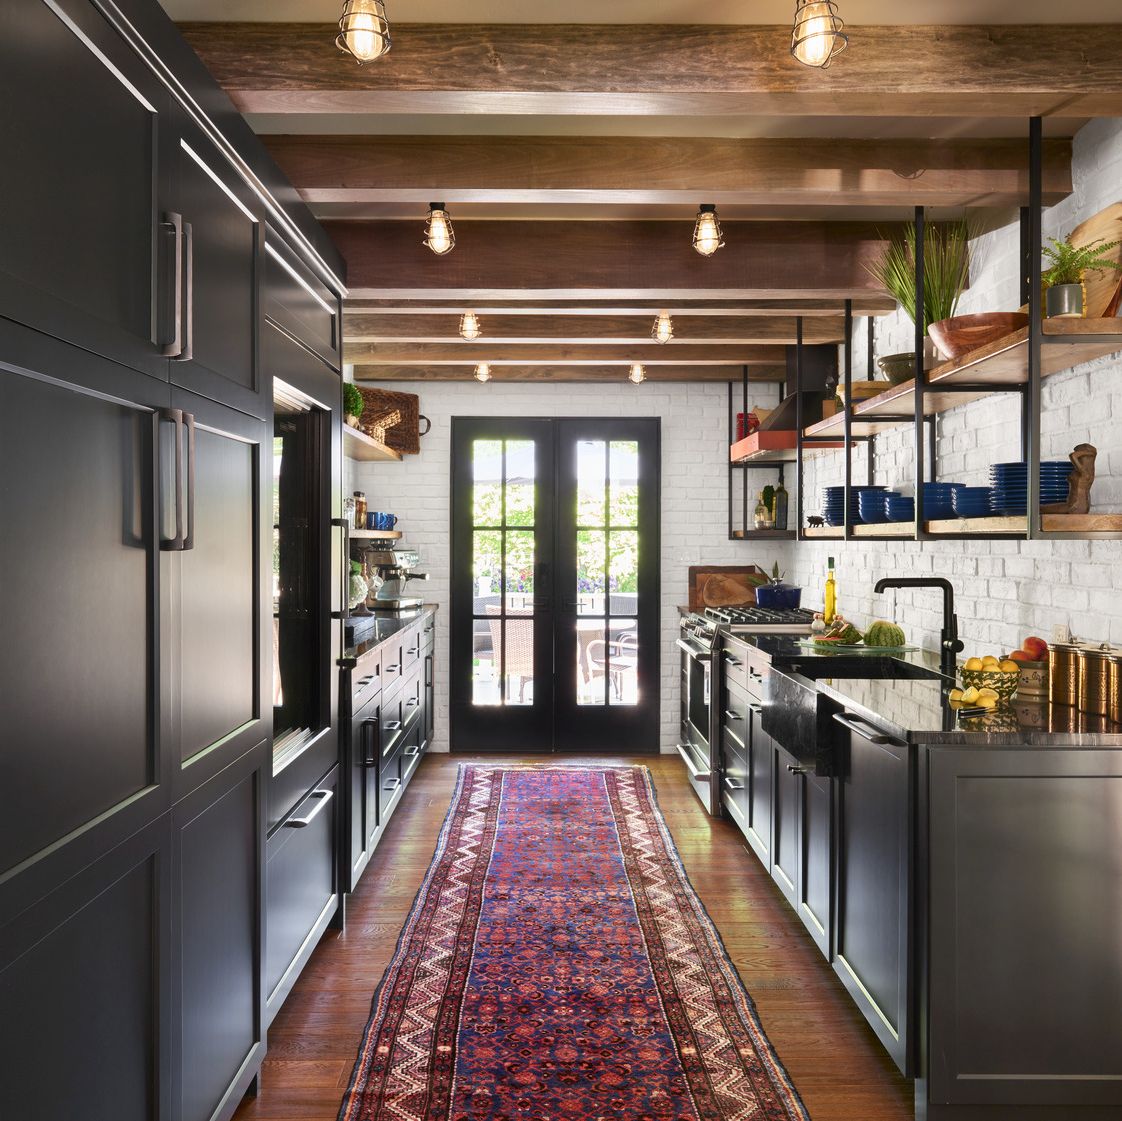 15 Galley Kitchen Designs That Will Make Your Small Space Feel Huge